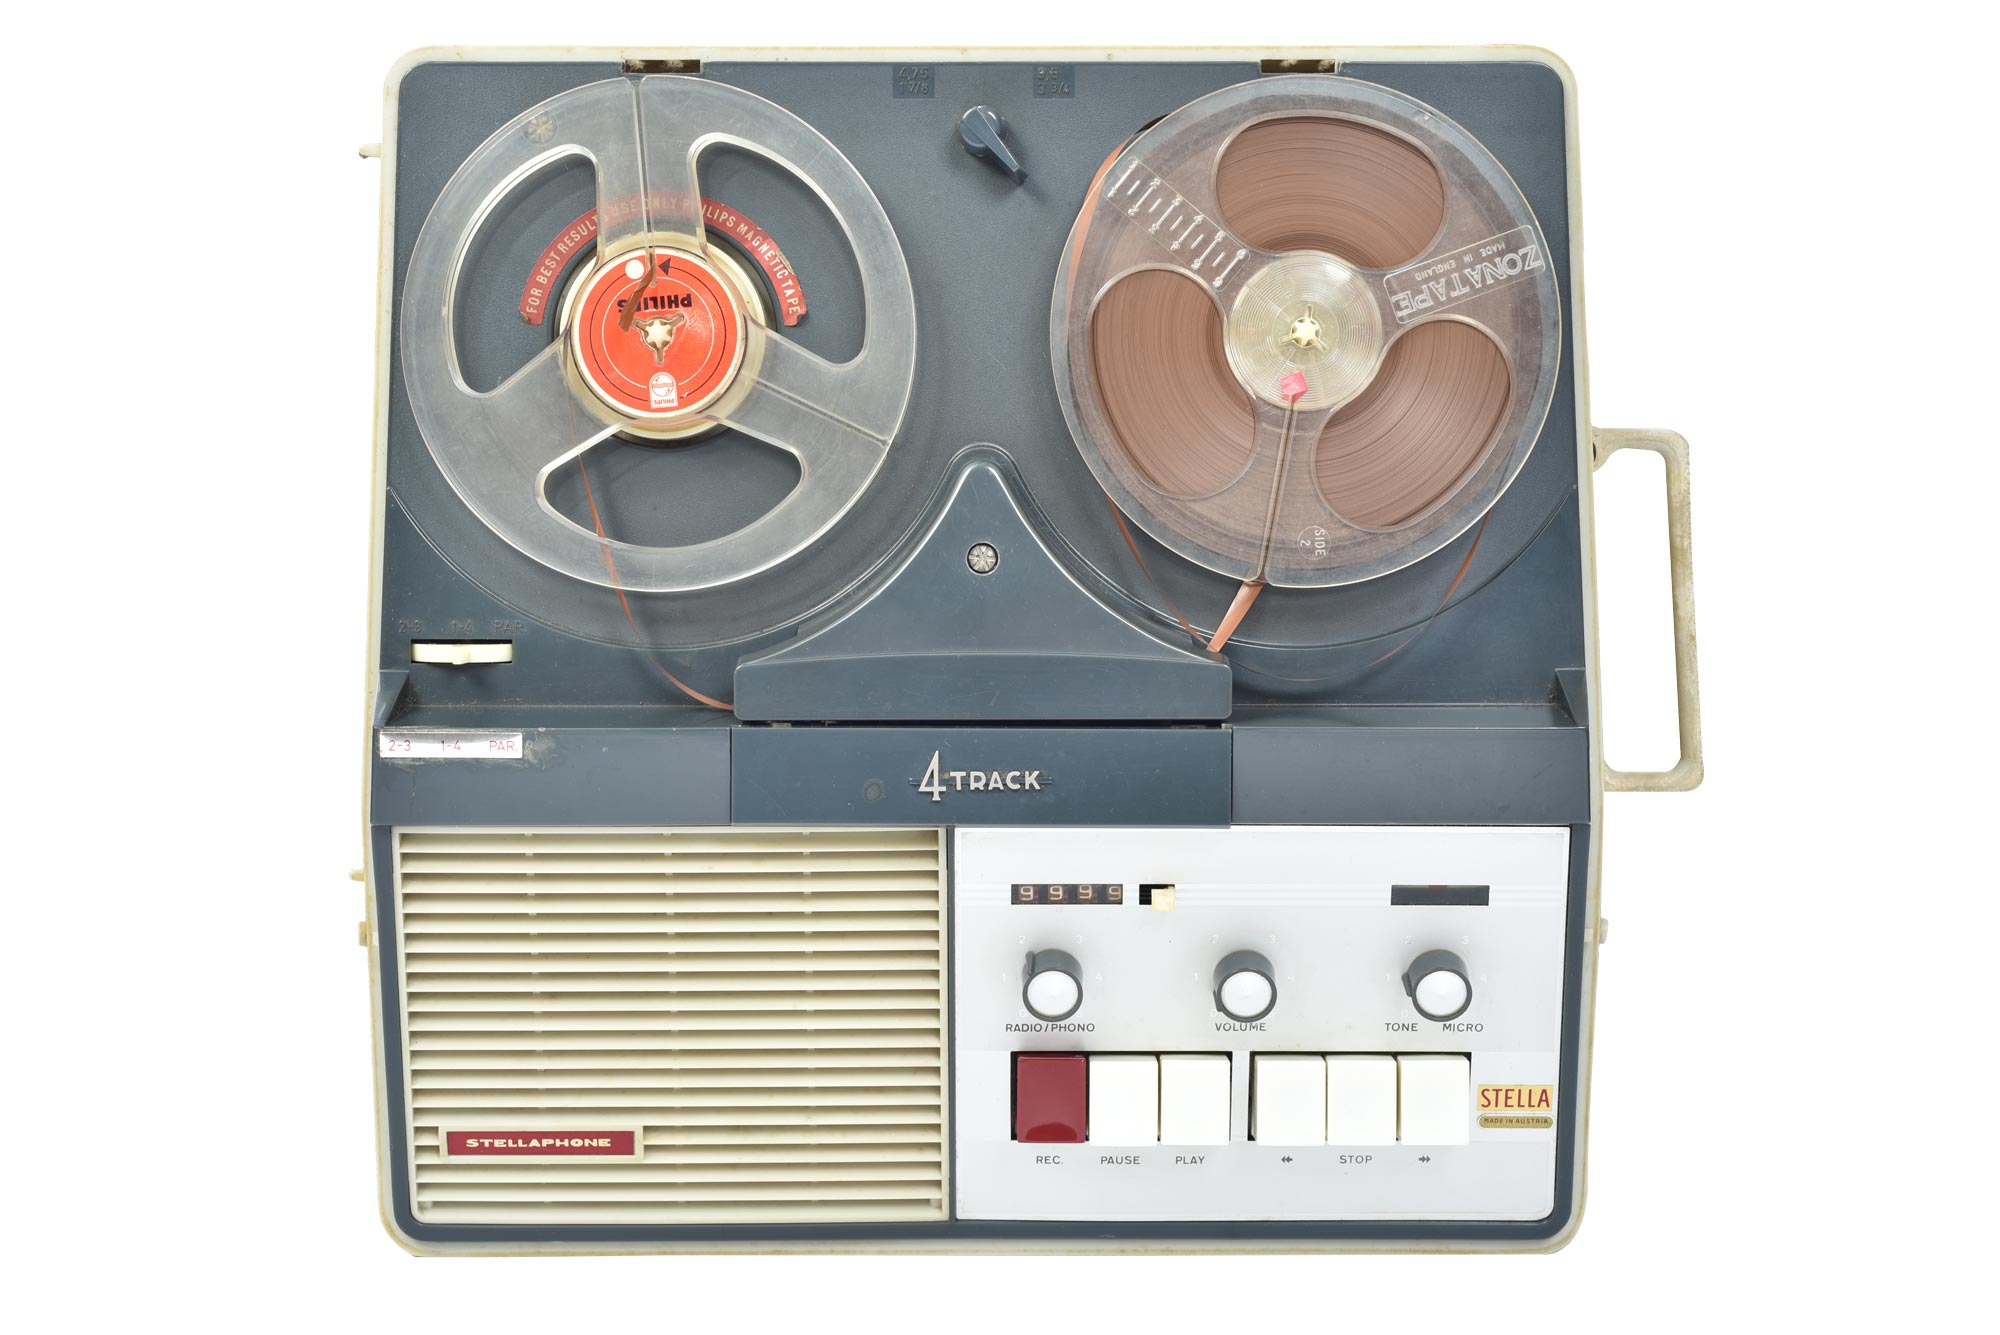 Stellaphone brand reel to reel recorder fitted with Synchrotape